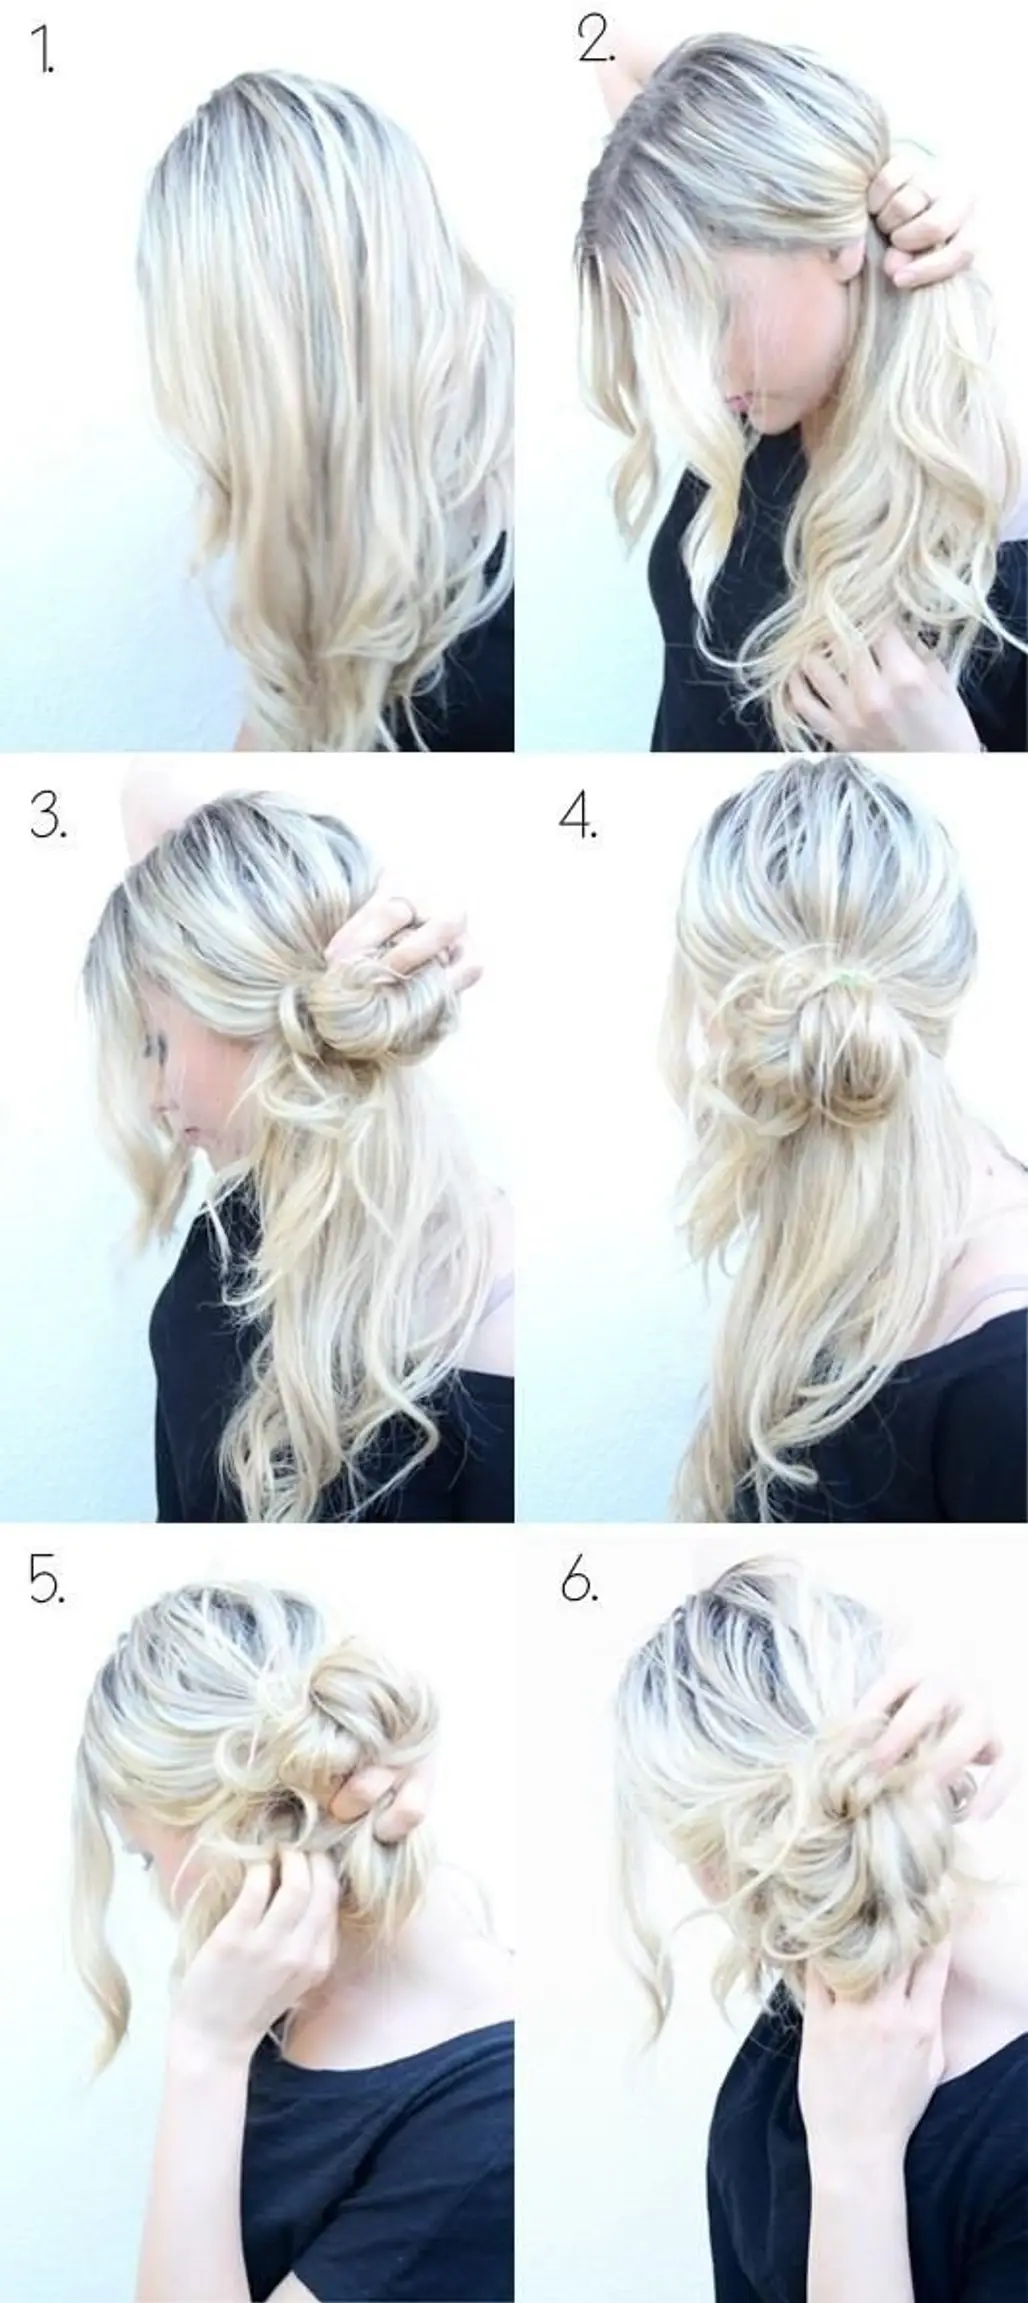 hair,clothing,blond,hairstyle,bridal accessory,